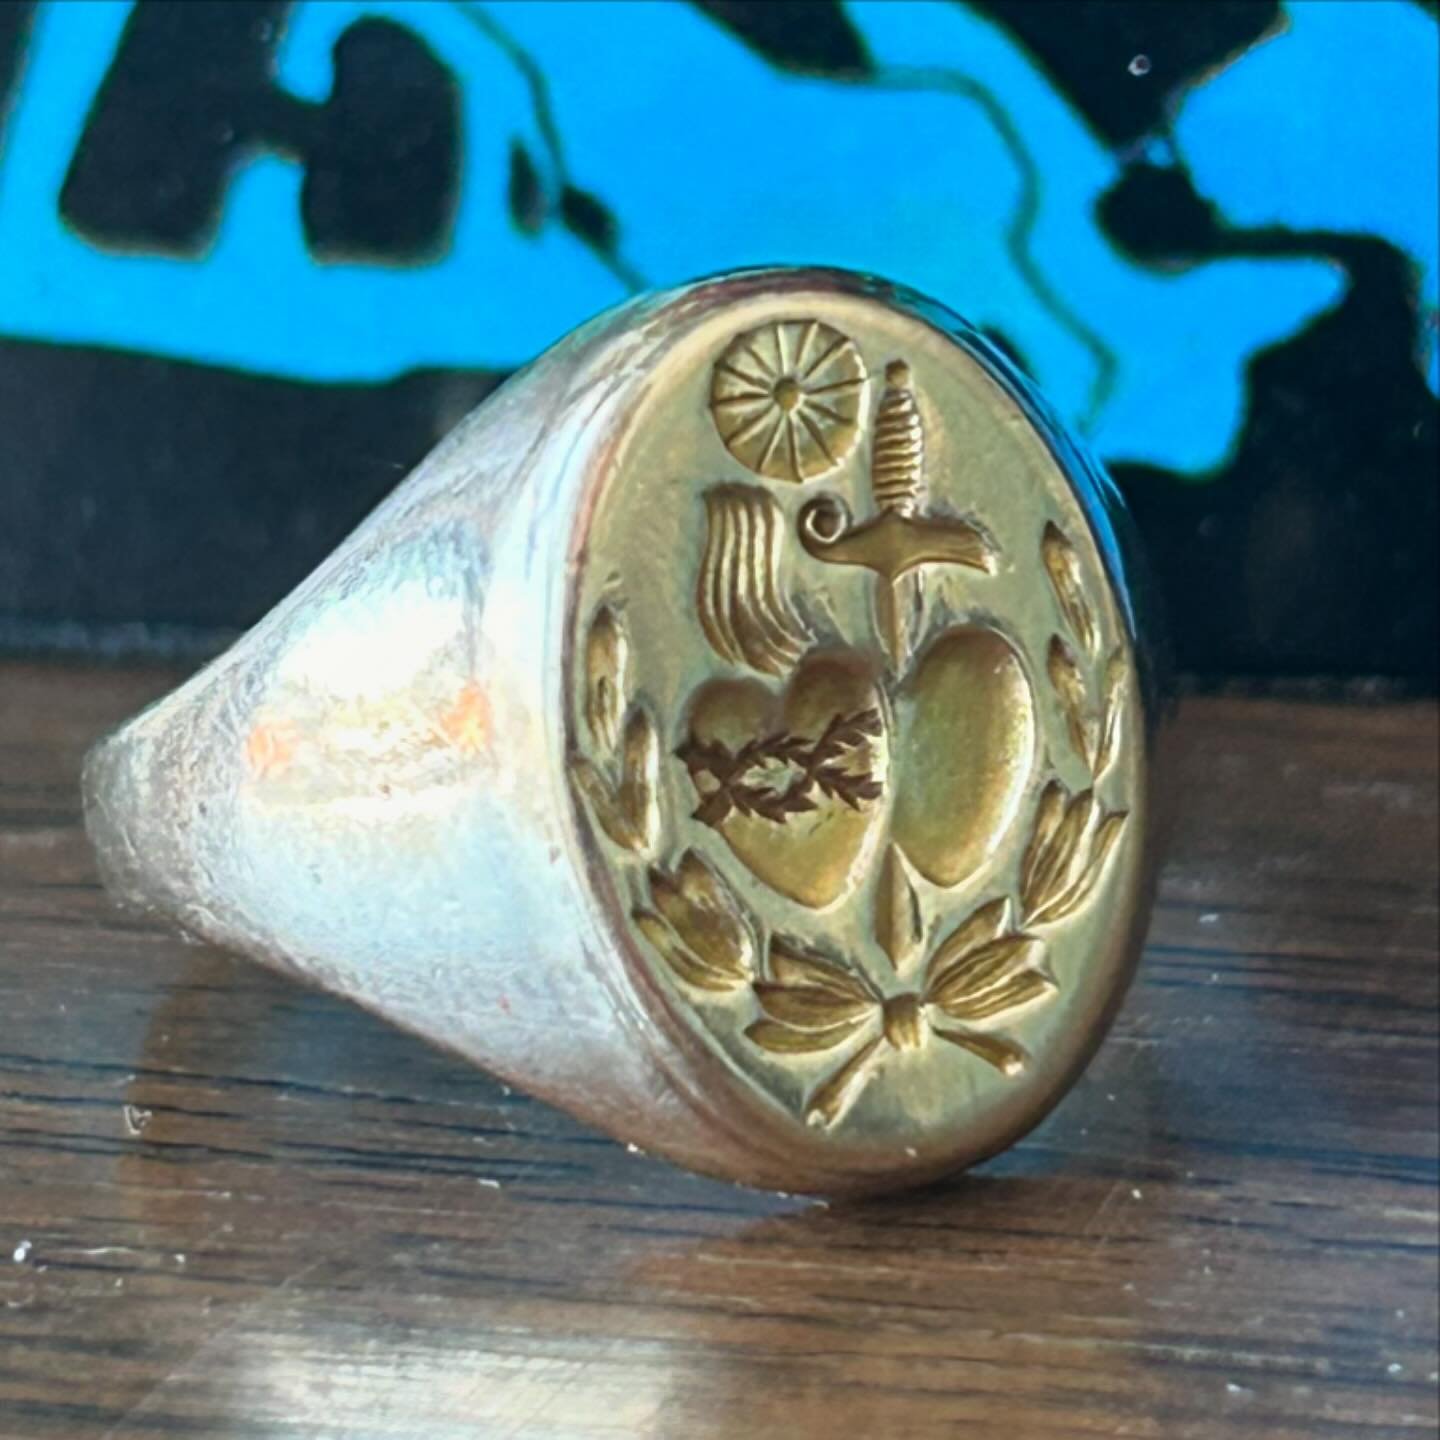 Was very surprised to find one of these mid century solid gold sacred heart rings again! Ring is sold but check out this vintage double side Guadalupe and Jesus solid 14k gold necklace I have available, 20&rdquo; in length.

DM for inquires 
Thanks f